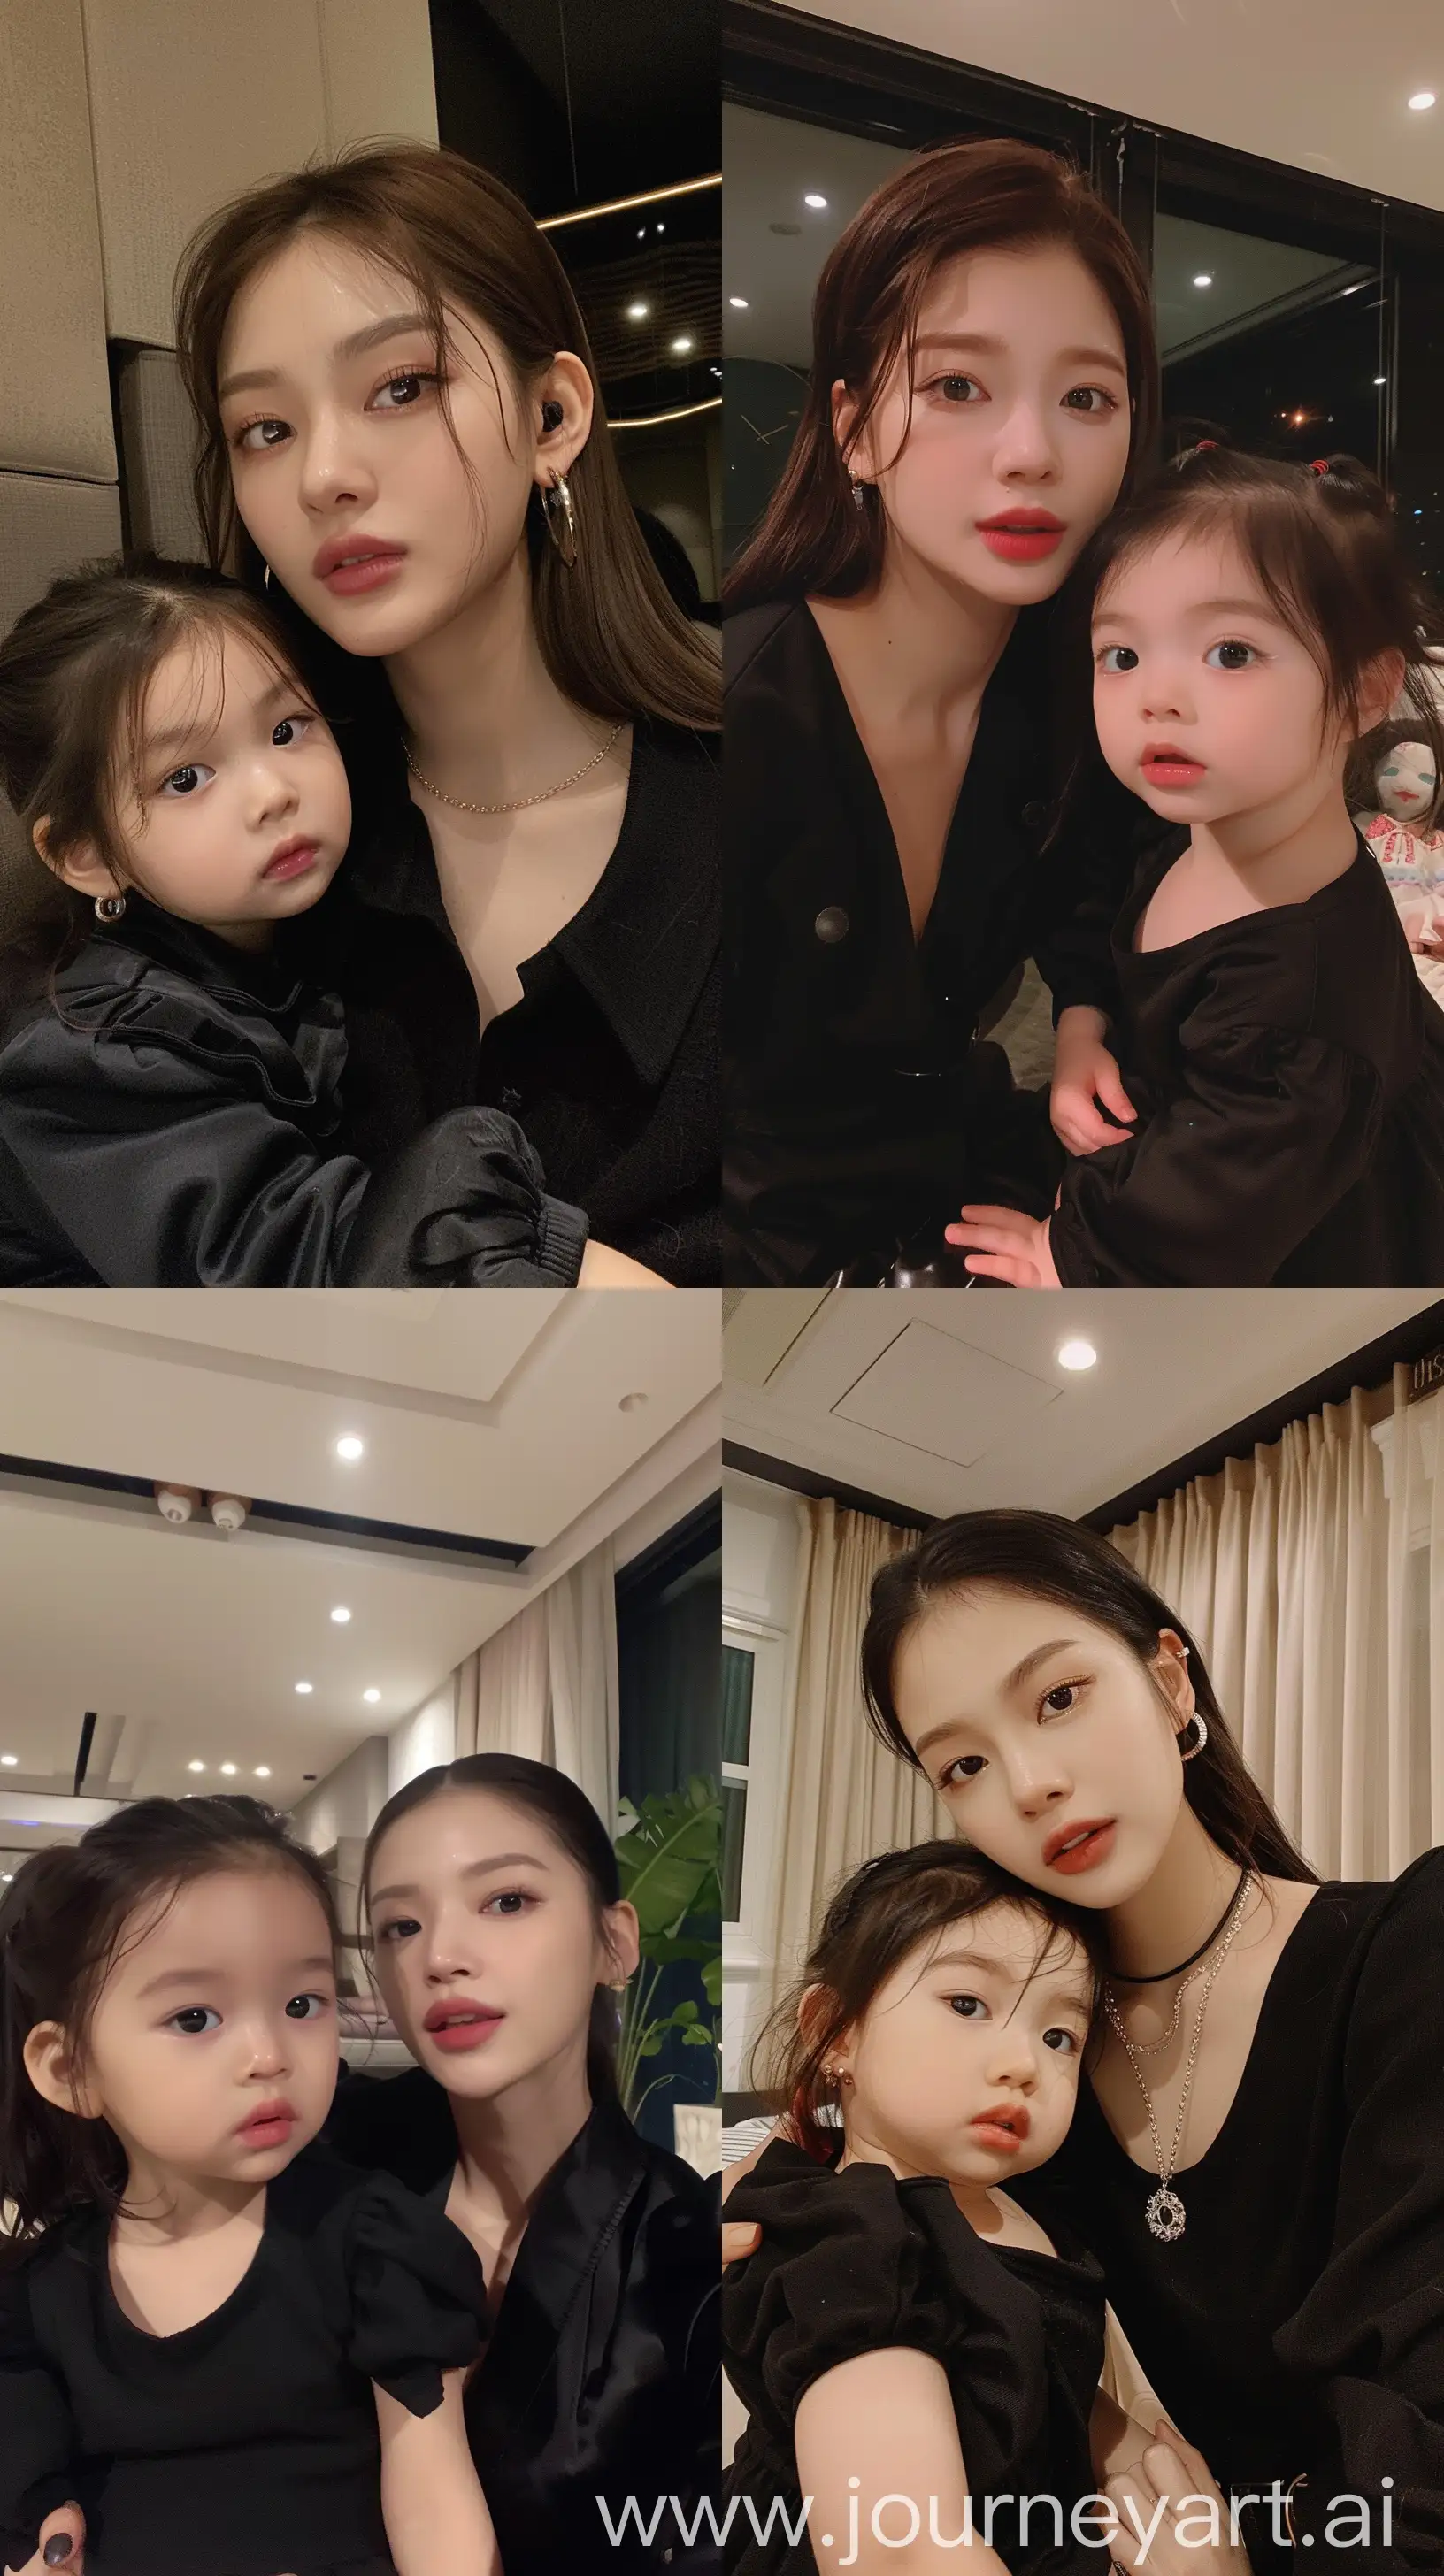 blackpink's jennie selfie with 2 years old  girl, facial feature look a like blackpink's jennie, aestethic selfie, wearing black outfit, night times, aestethic make up,hotly elegant young mom --ar 9:16 